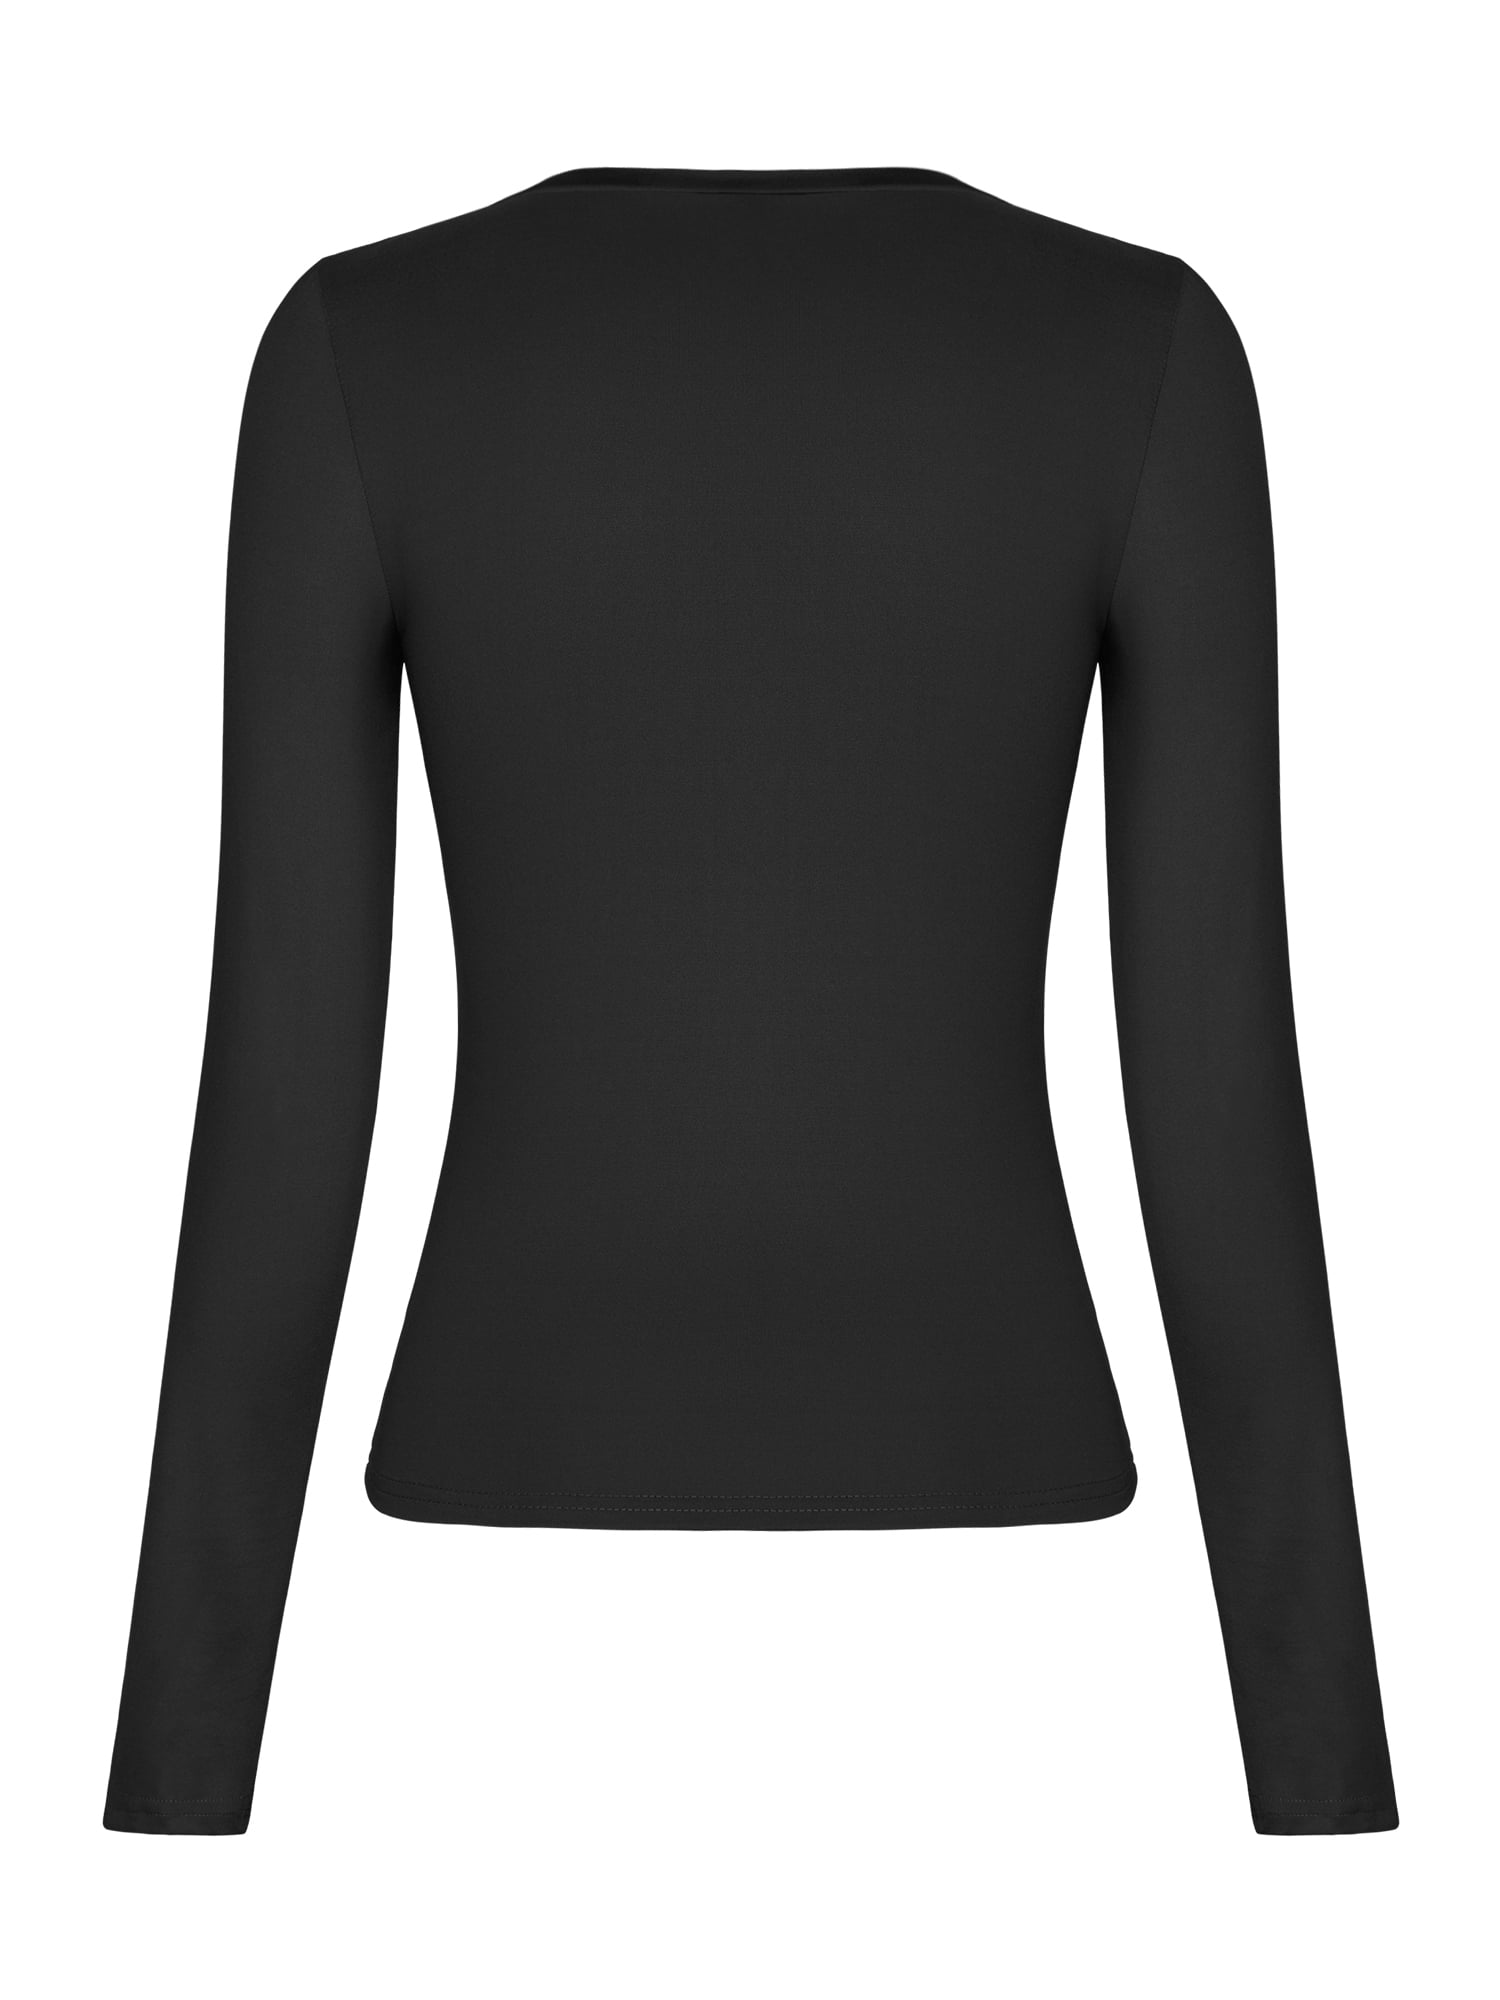 LASLULU Womens Workout Crop Tops Long Sleeve Seamless Cropped Yoga Tops Tee  Shirts Round Neckline Running Gym Shirts Fall Tops Outwear(Black Small) at   Women's Clothing store